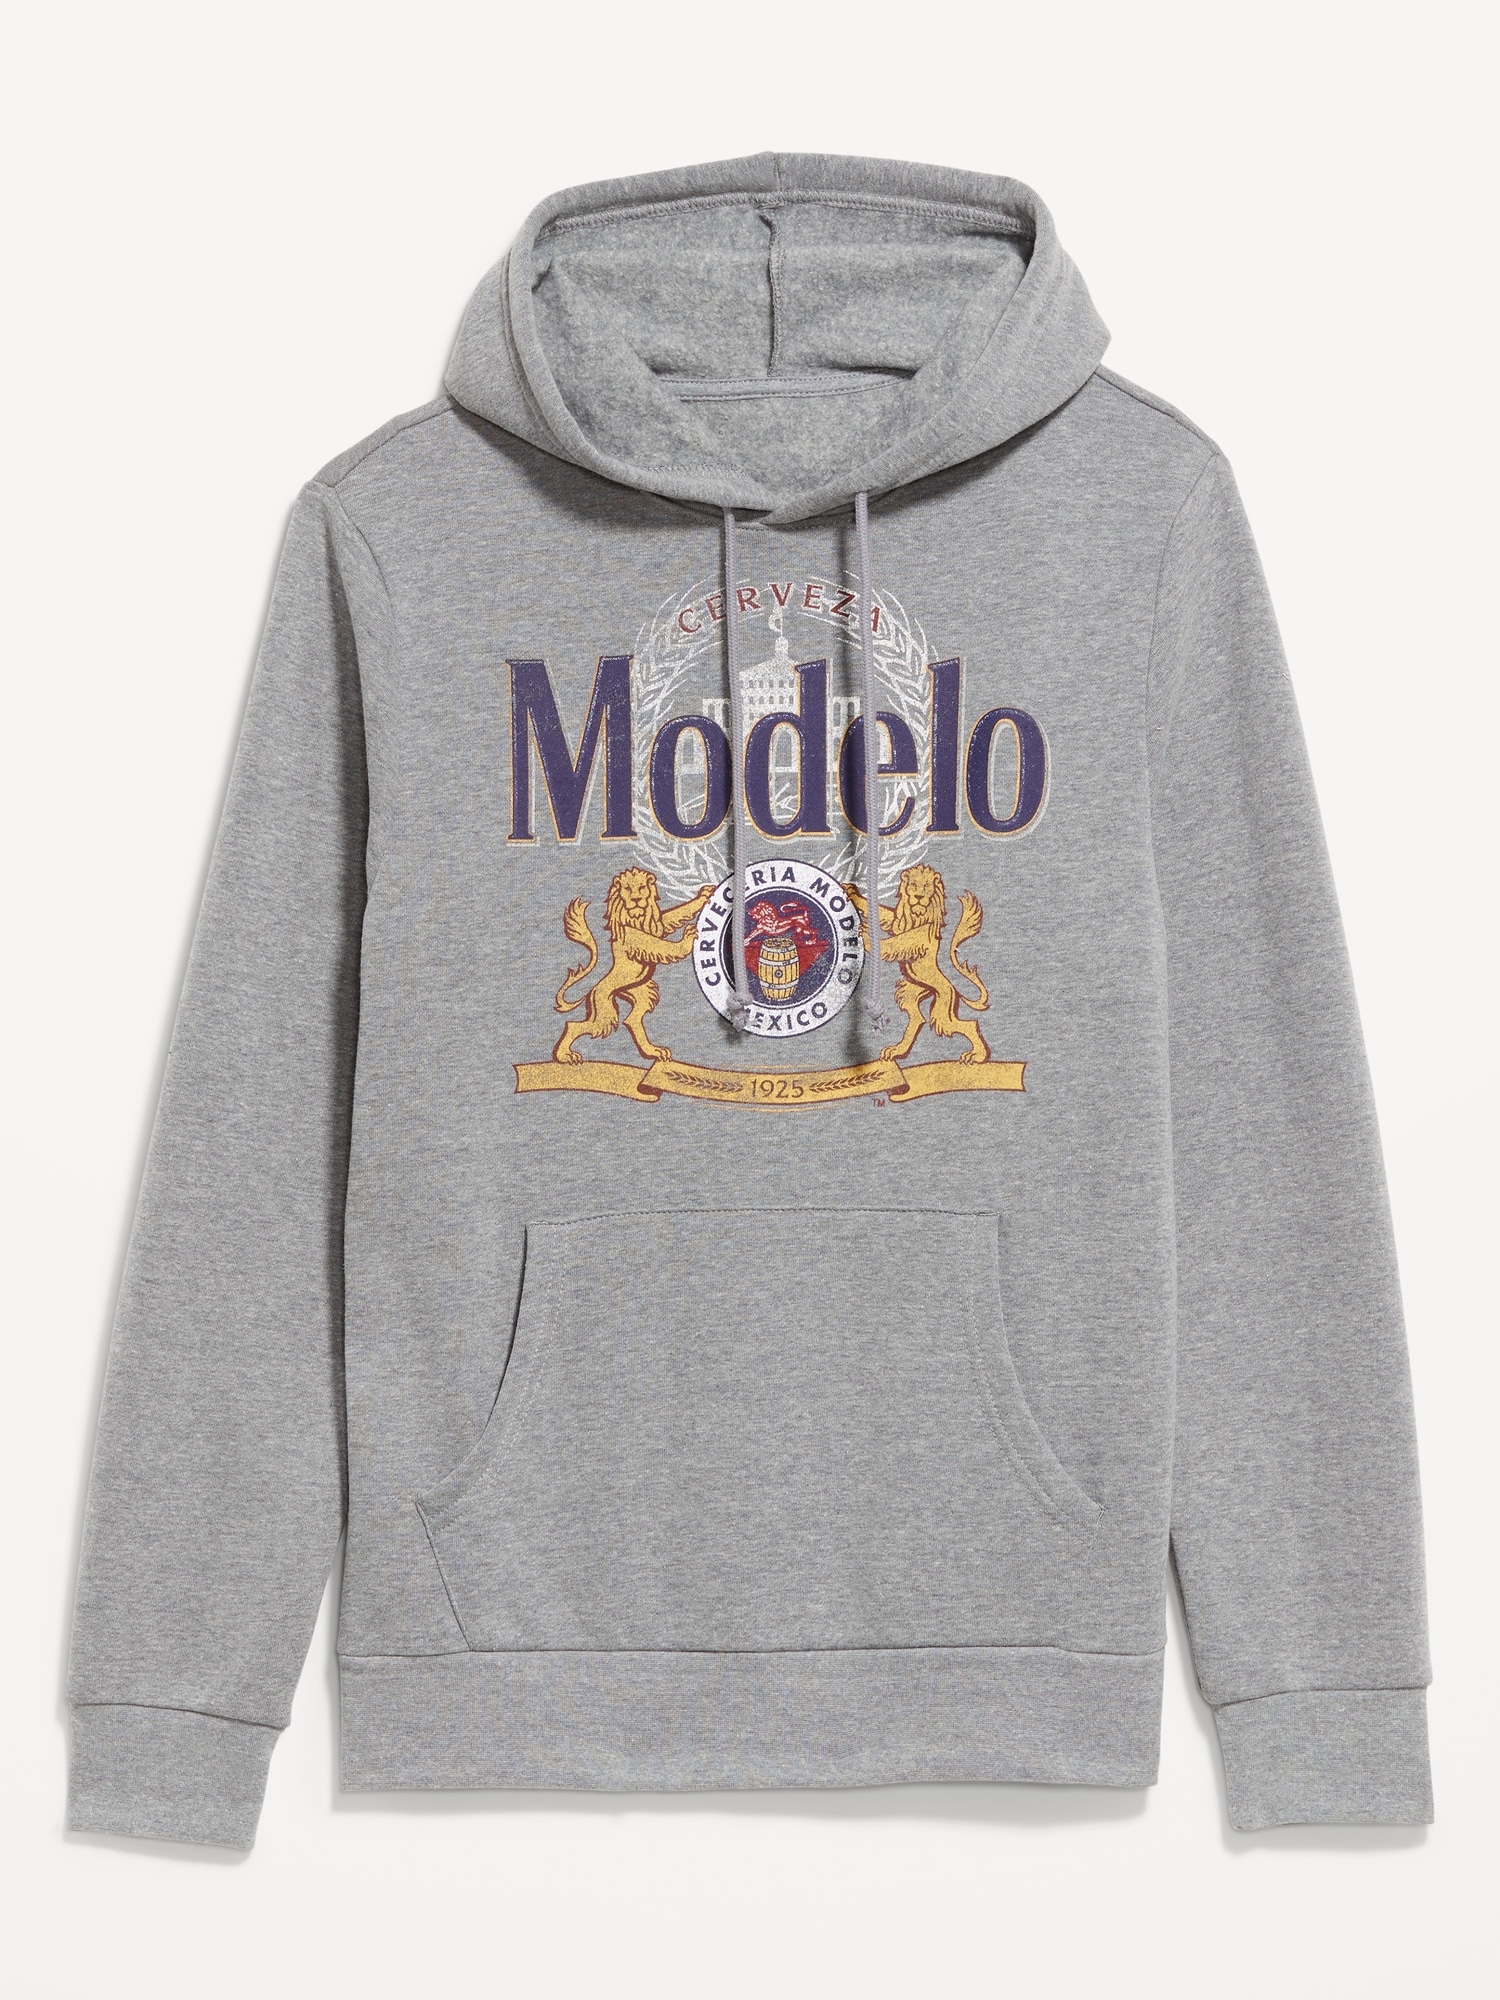 Cervezaⓒ Modelo Gender-Neutral Hoodie for Adults